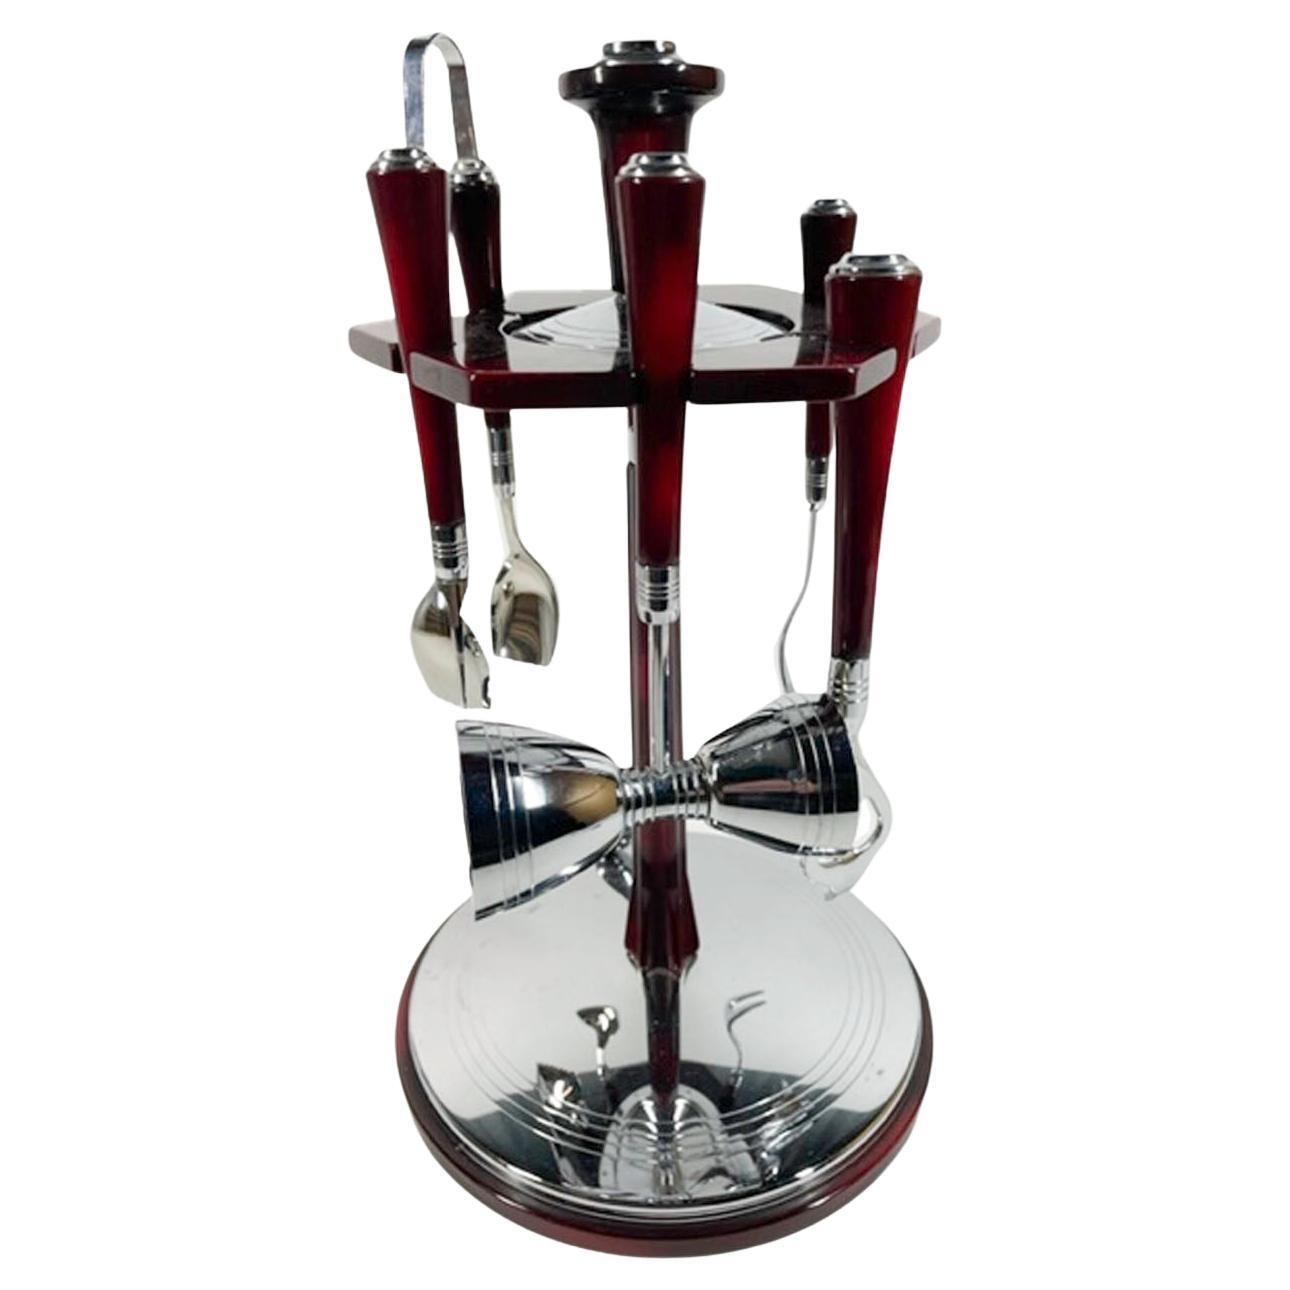 Glo-Hill 6 Piece Bar Tool Set with Revolving Stand in Red Bakelite and Chrome For Sale